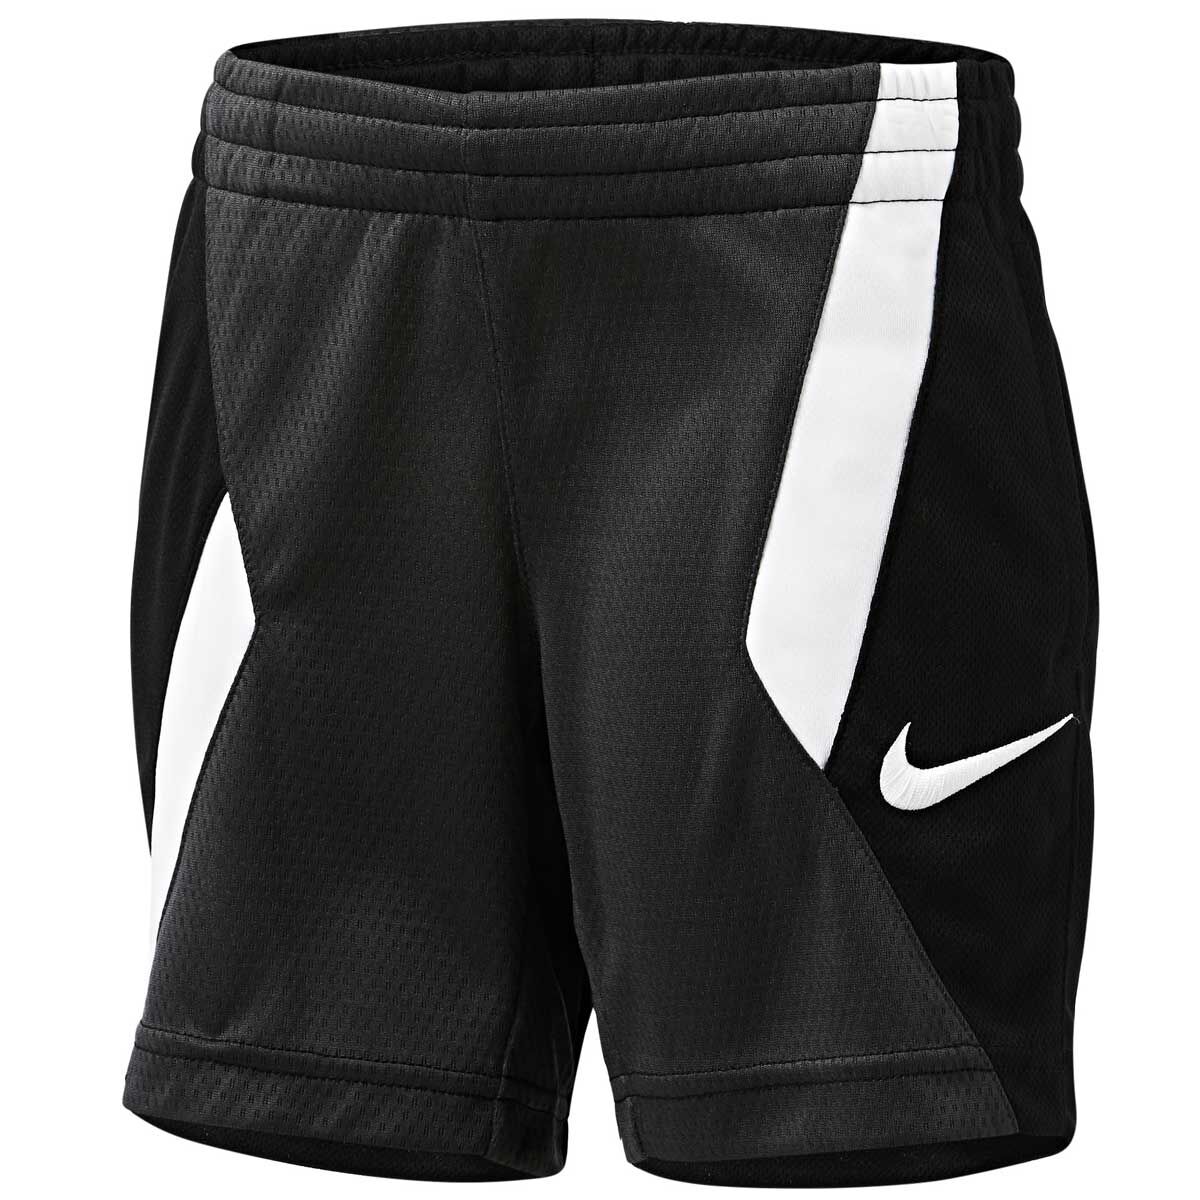 nike shorts for babies